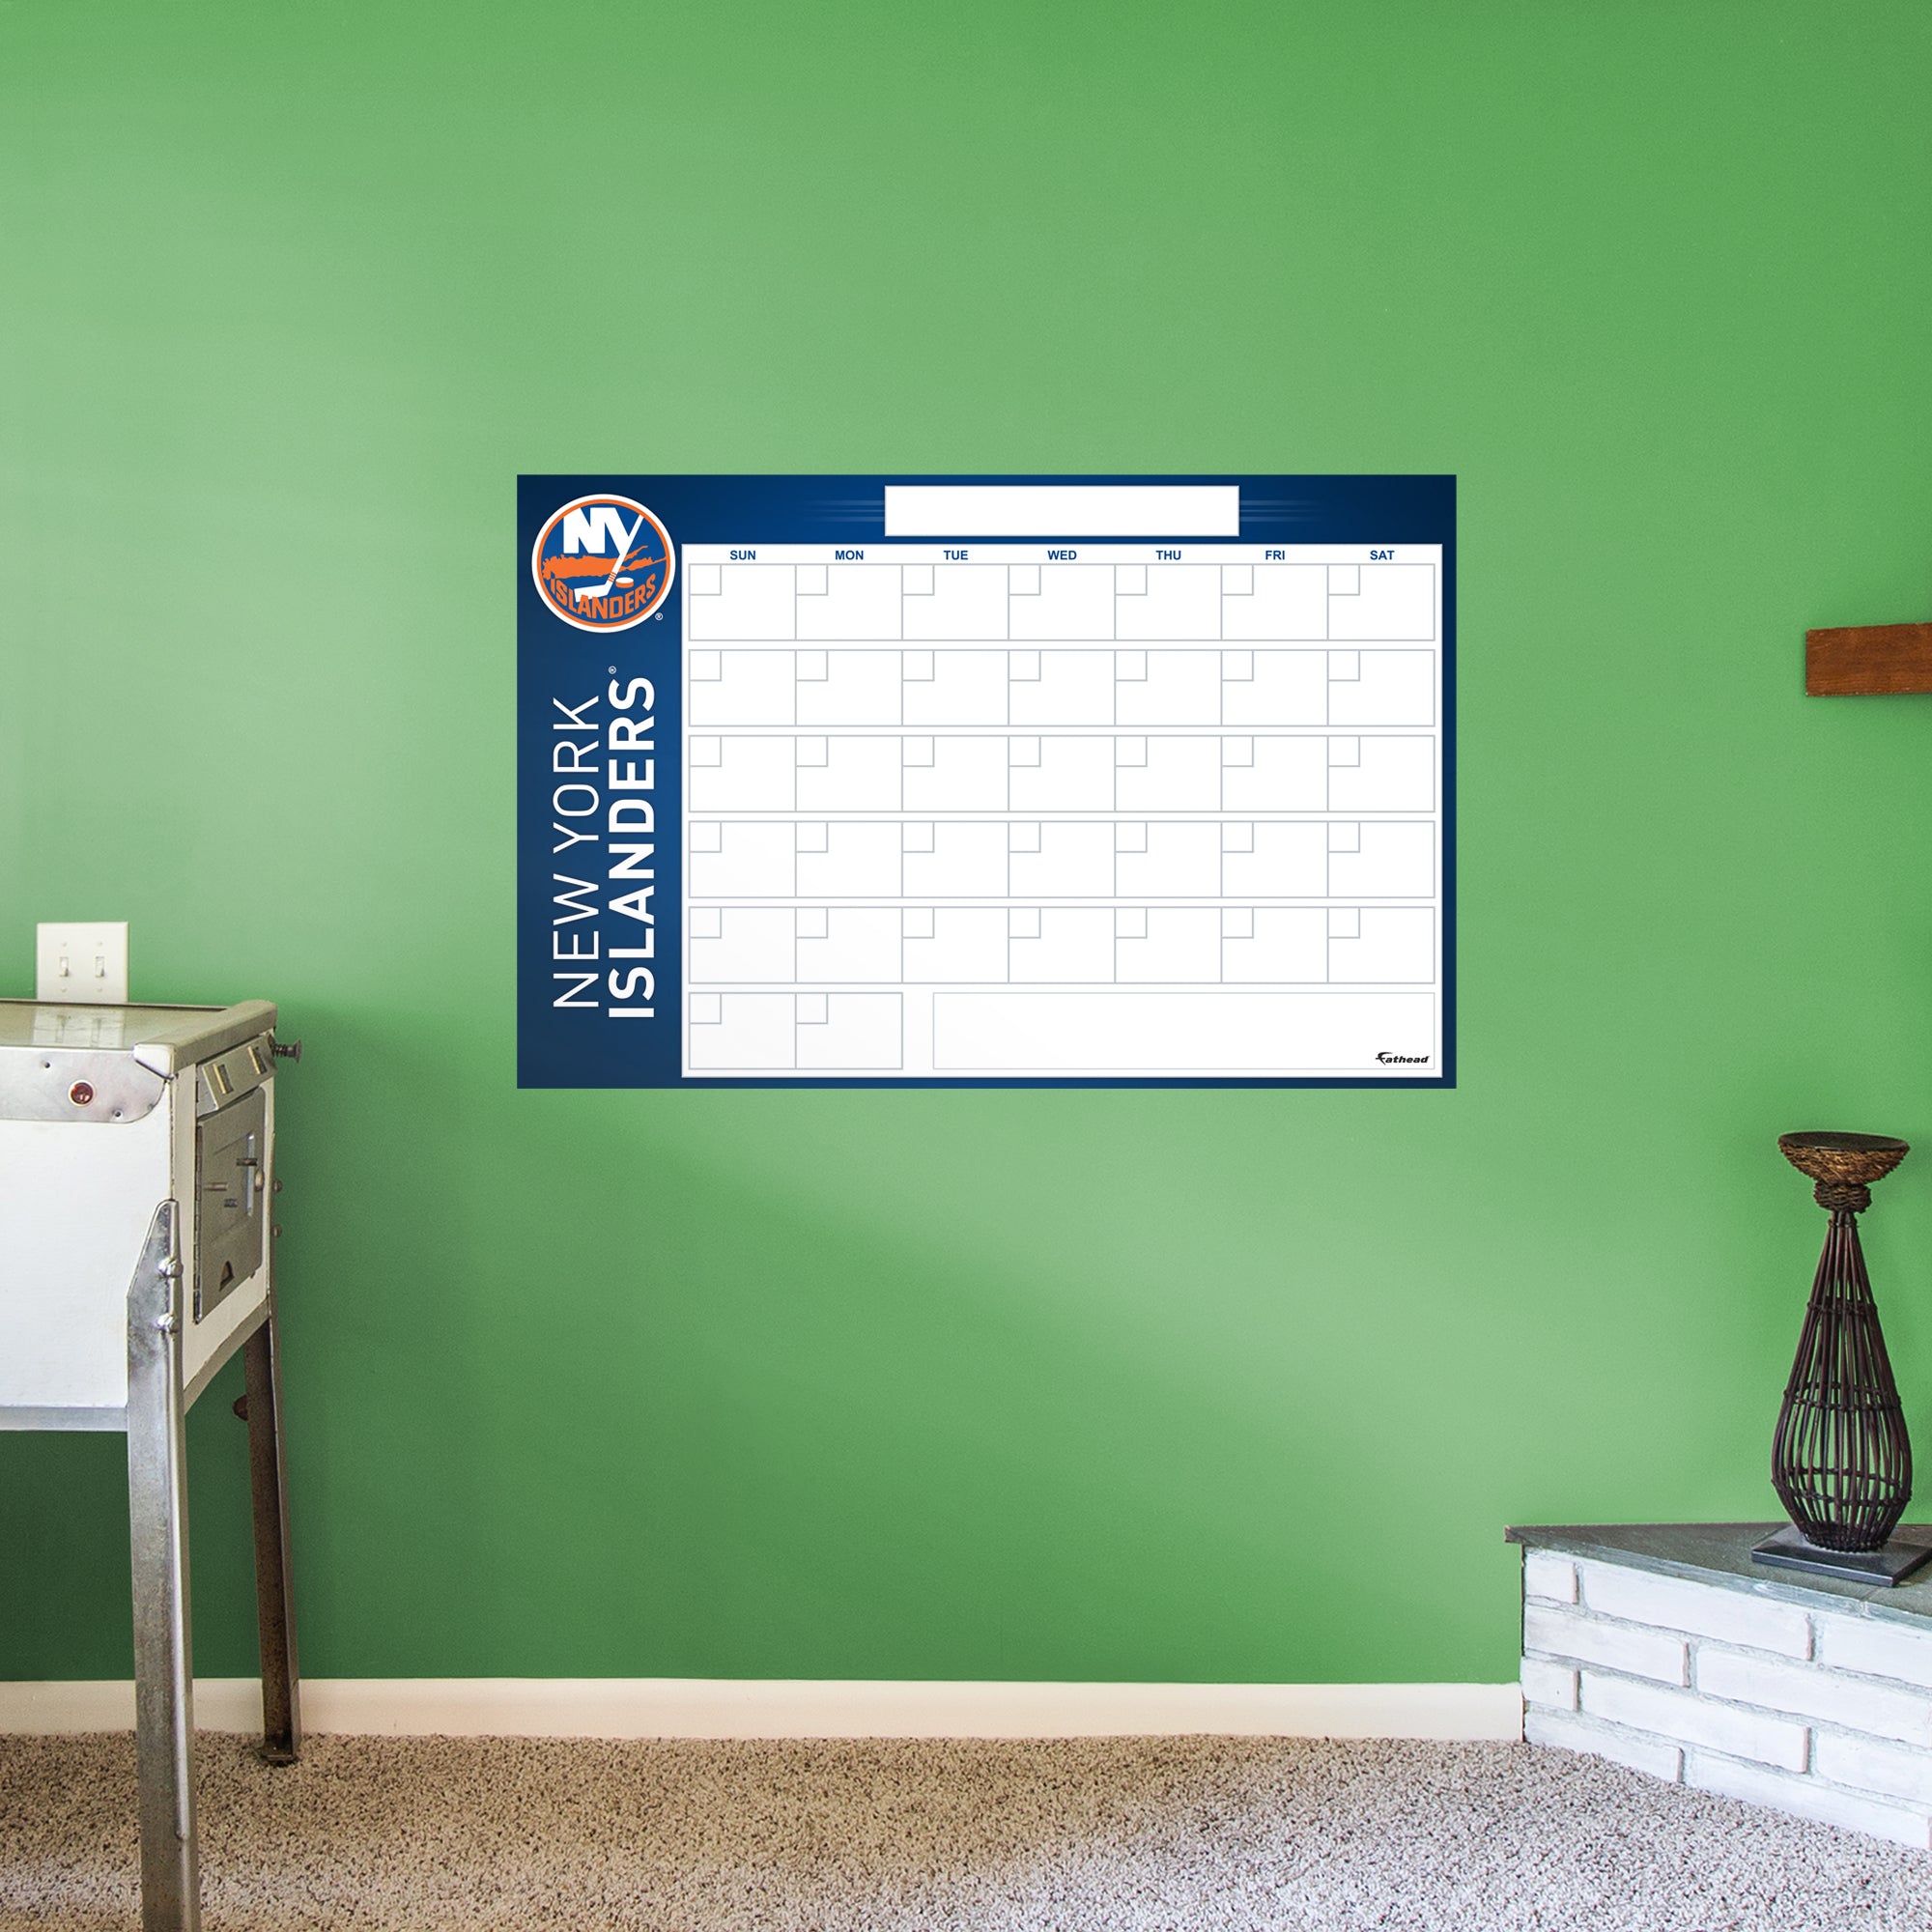 New York Islanders Dry Erase Calendar - Officially Licensed NHL Removable Wall Decal Giant Decal (57"W x 34"H) by Fathead | Viny